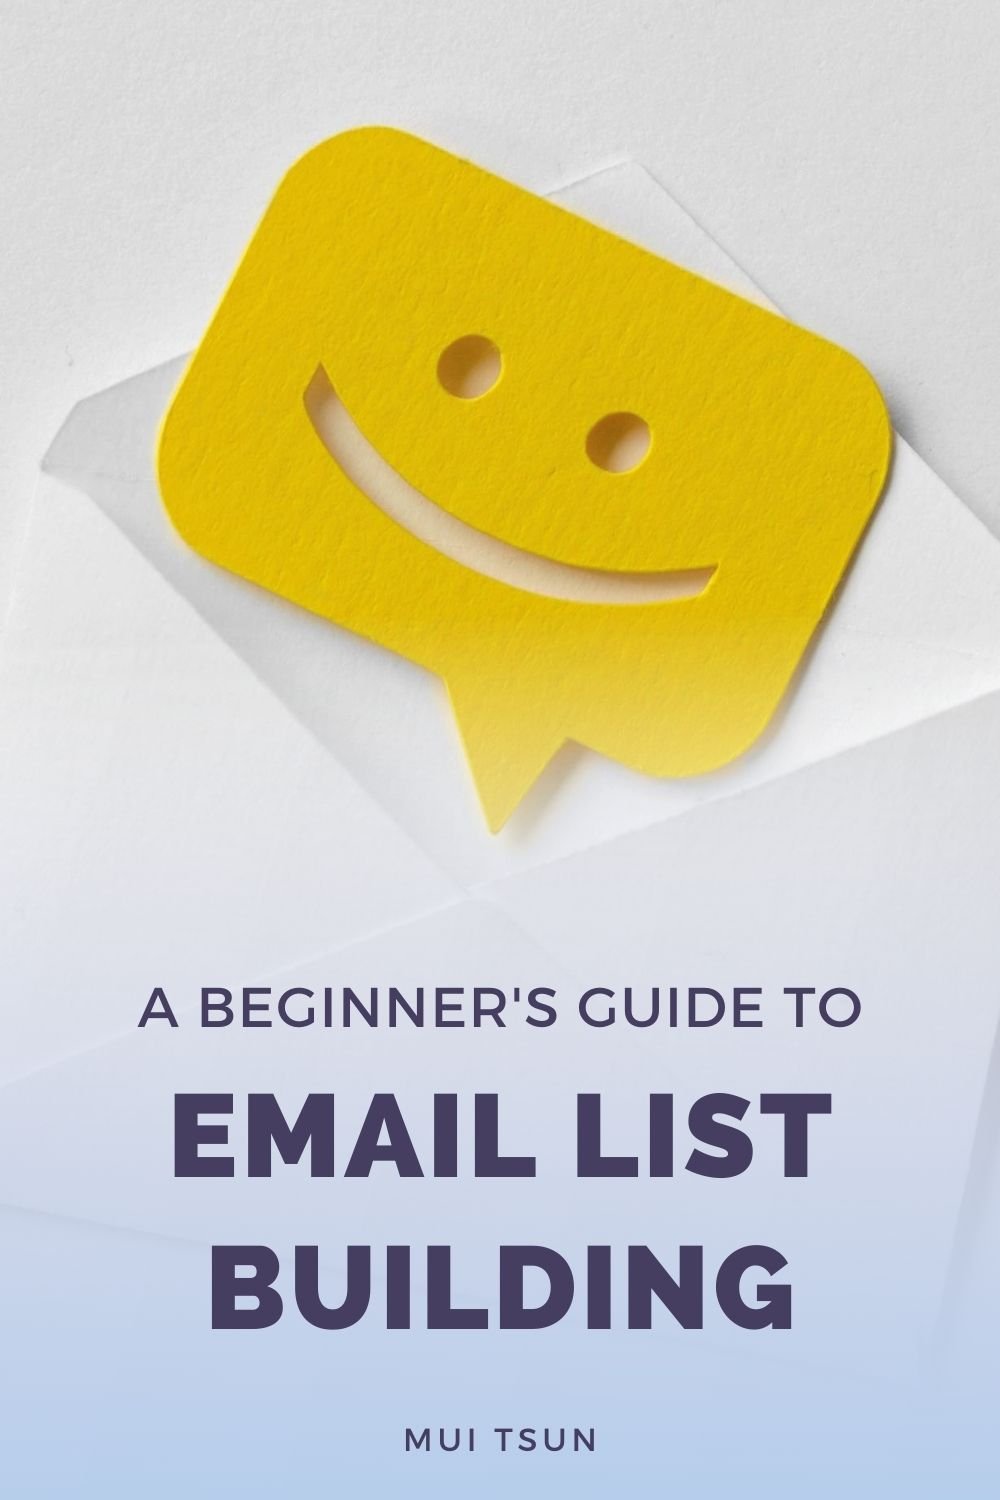 A Beginner's Guide to Email List Building